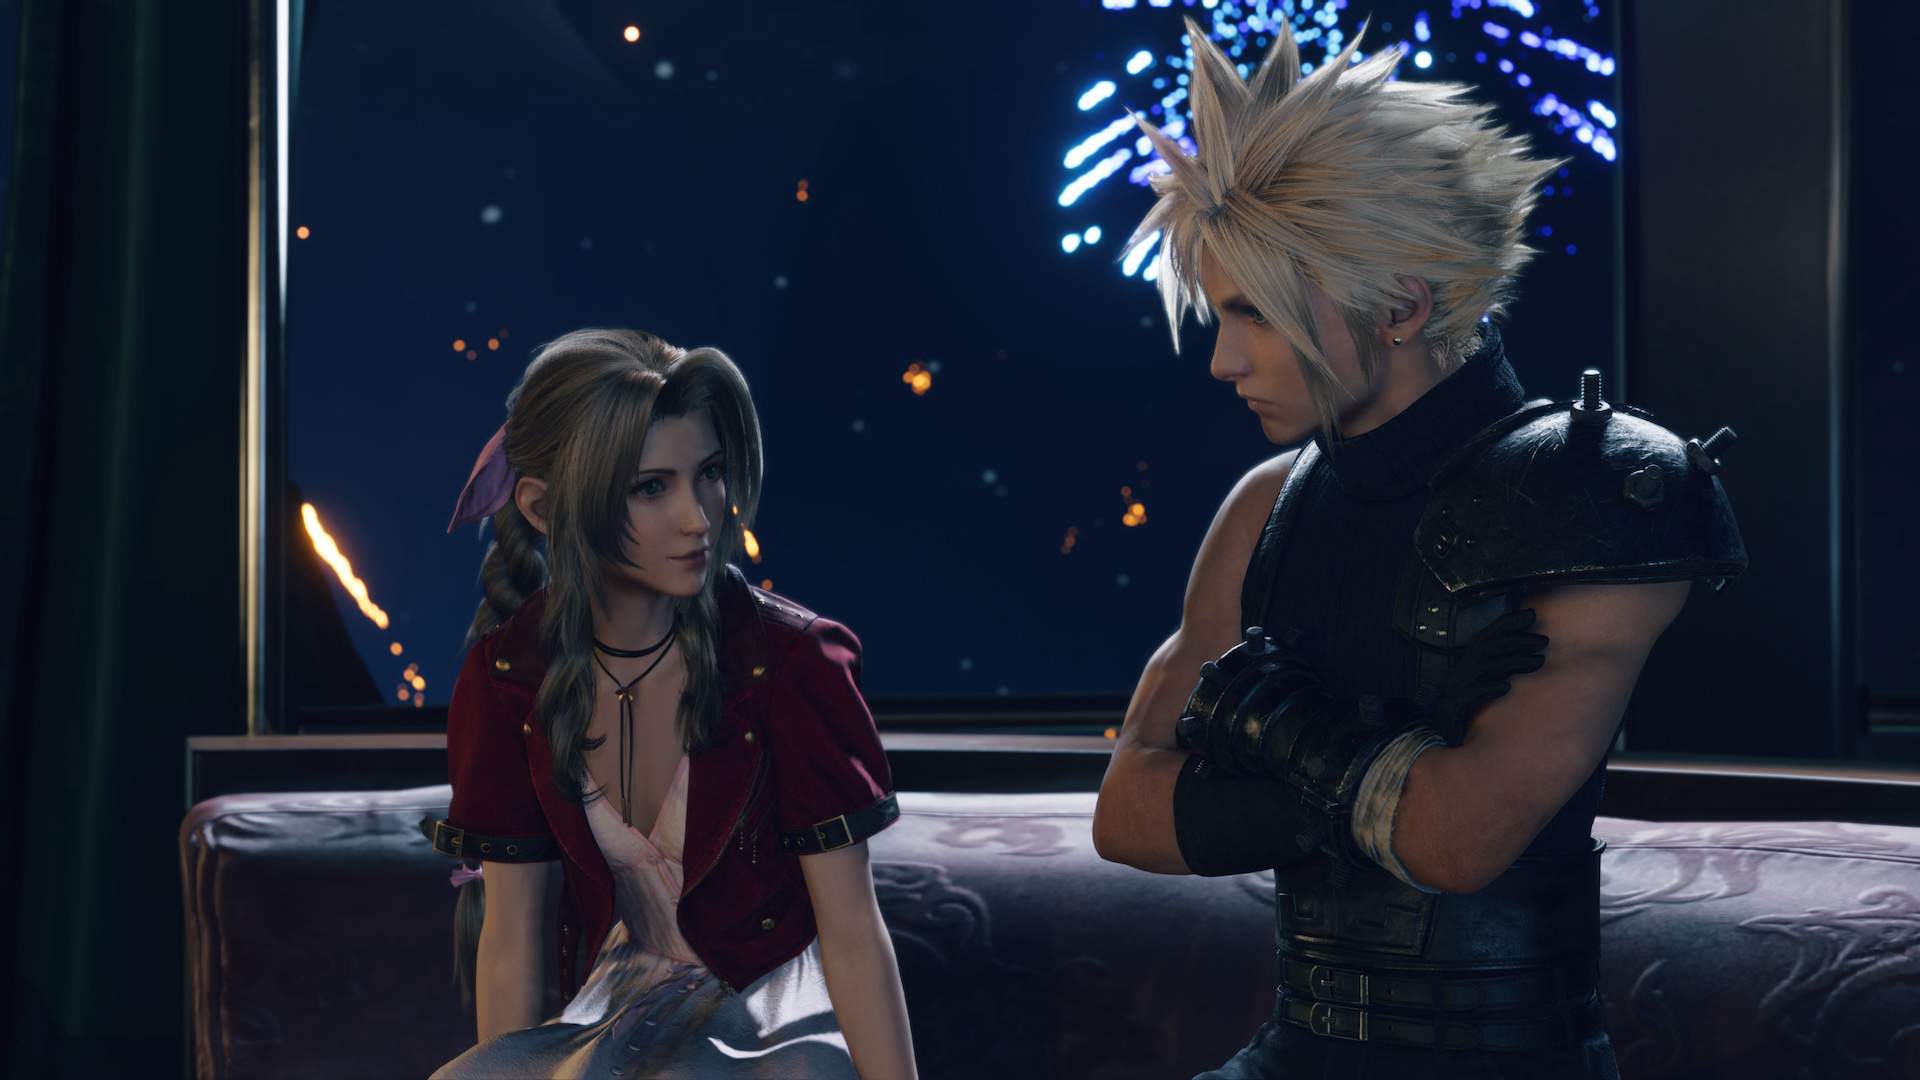 New Final Fantasy VII Remake Video Catches Players Up Before Rebirth Release